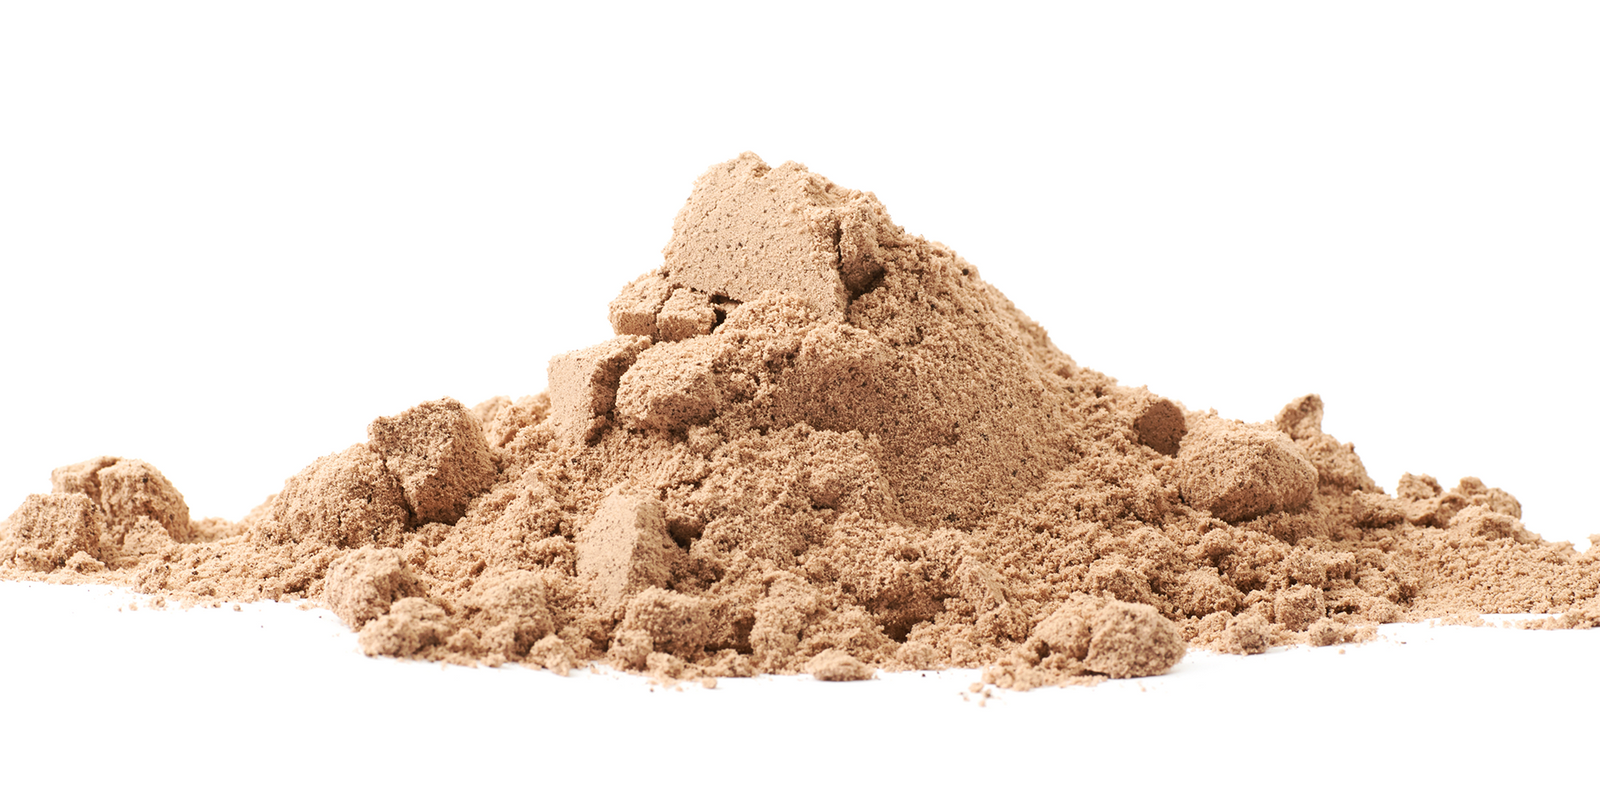 Soy protein vs. whey protein: which is best?